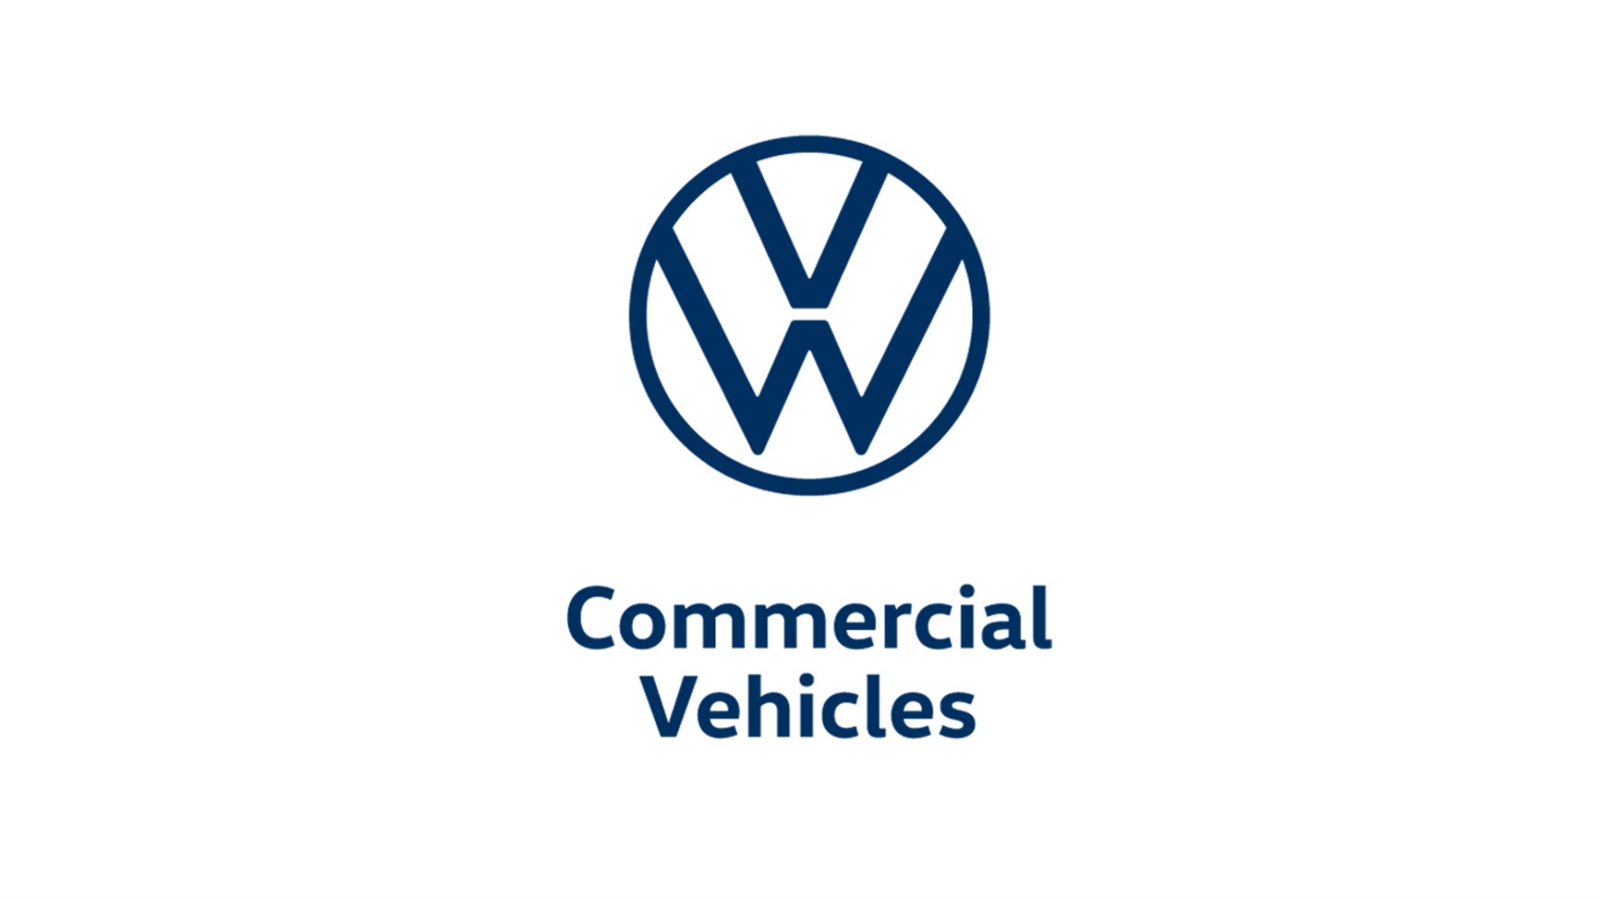 File:Volkswagen Commercial Vehicles logo 2019.svg - Wikipedia